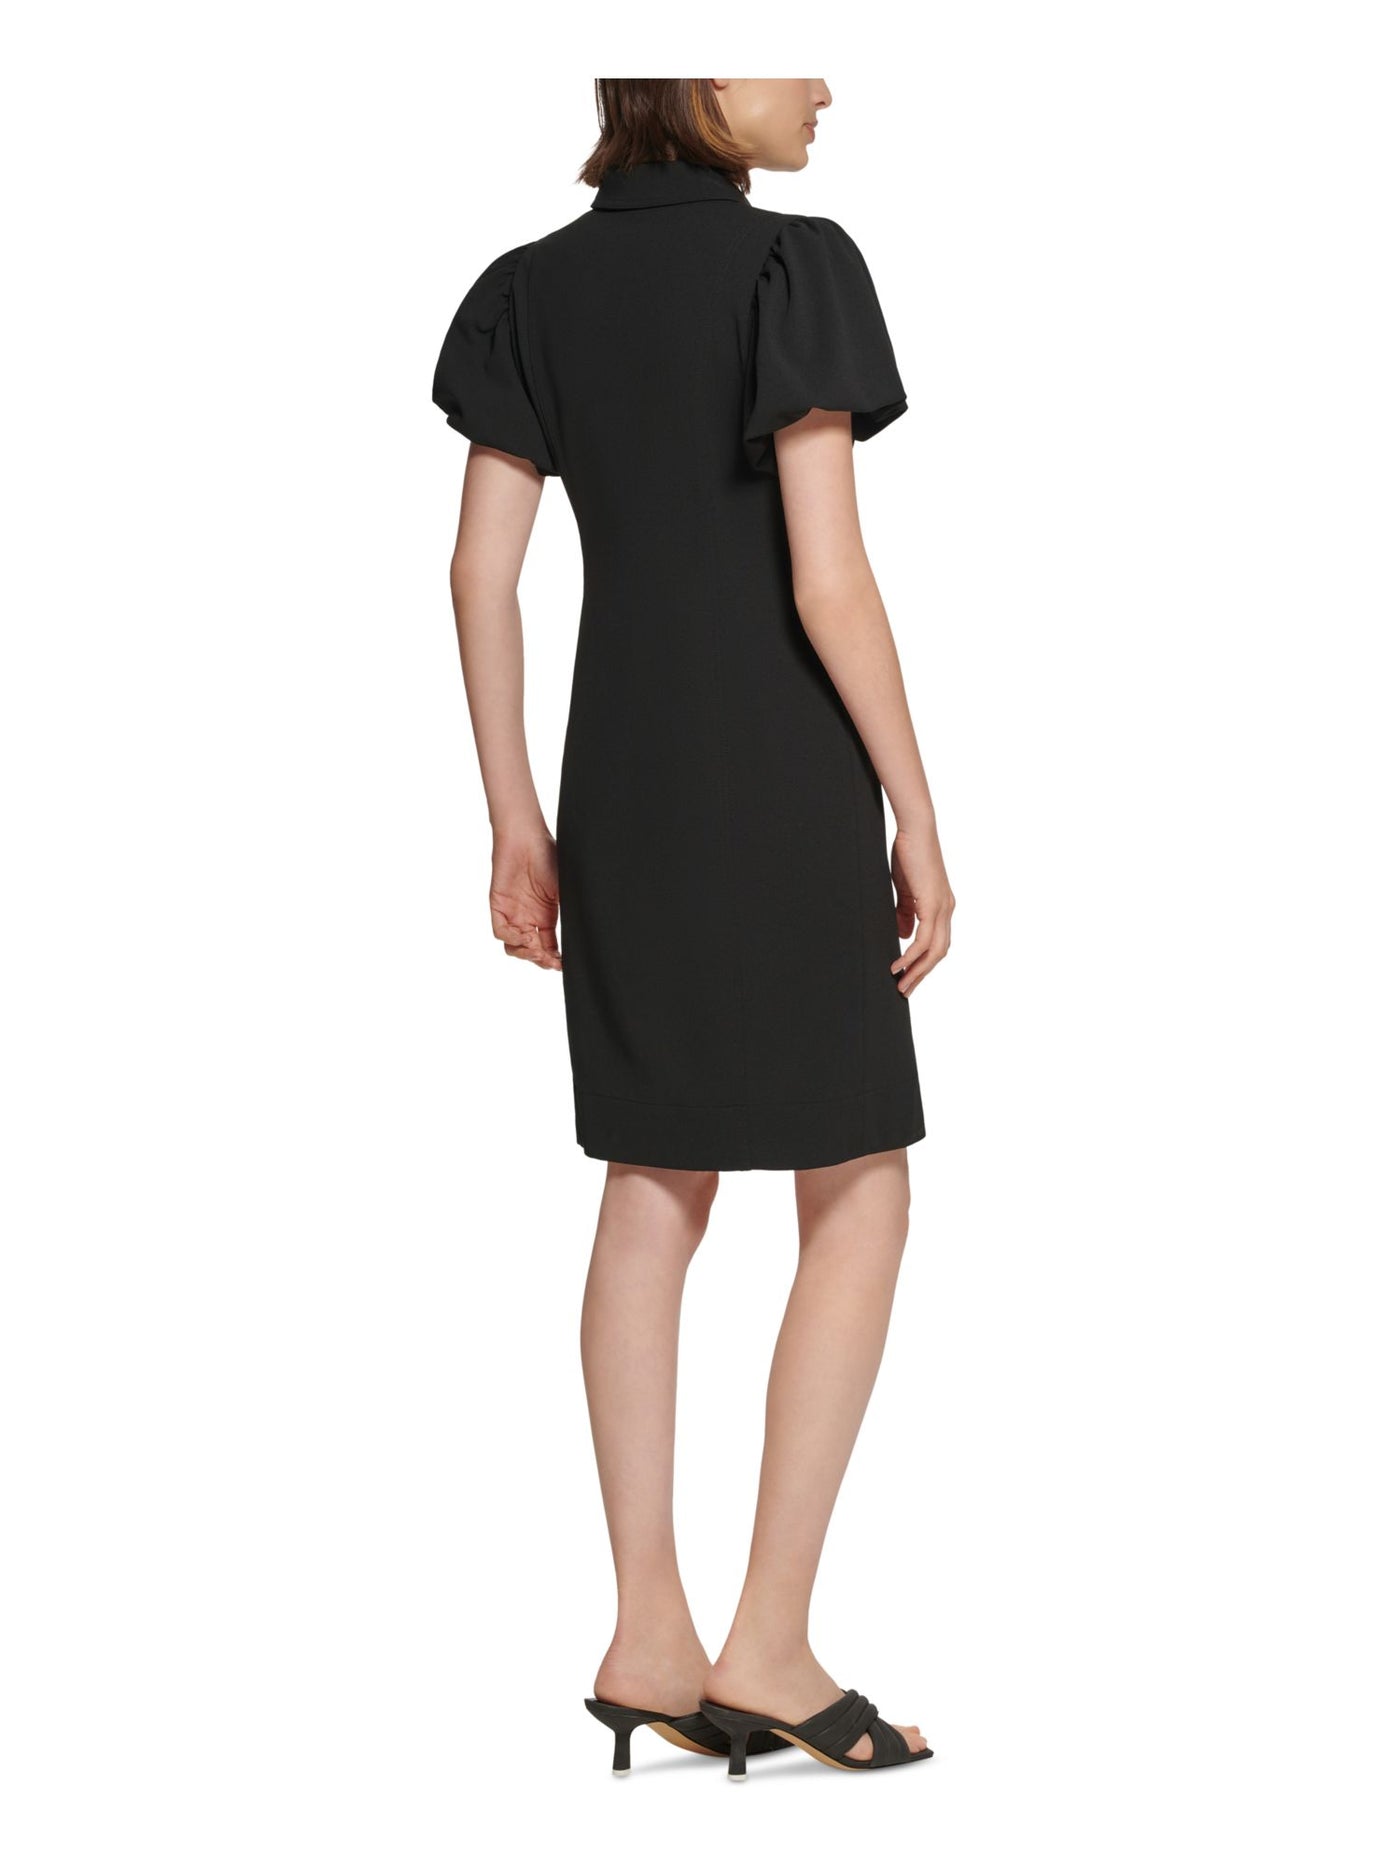 CALVIN KLEIN Womens Black Pouf Sleeve Collared Above The Knee Wear To Work Shirt Dress 6